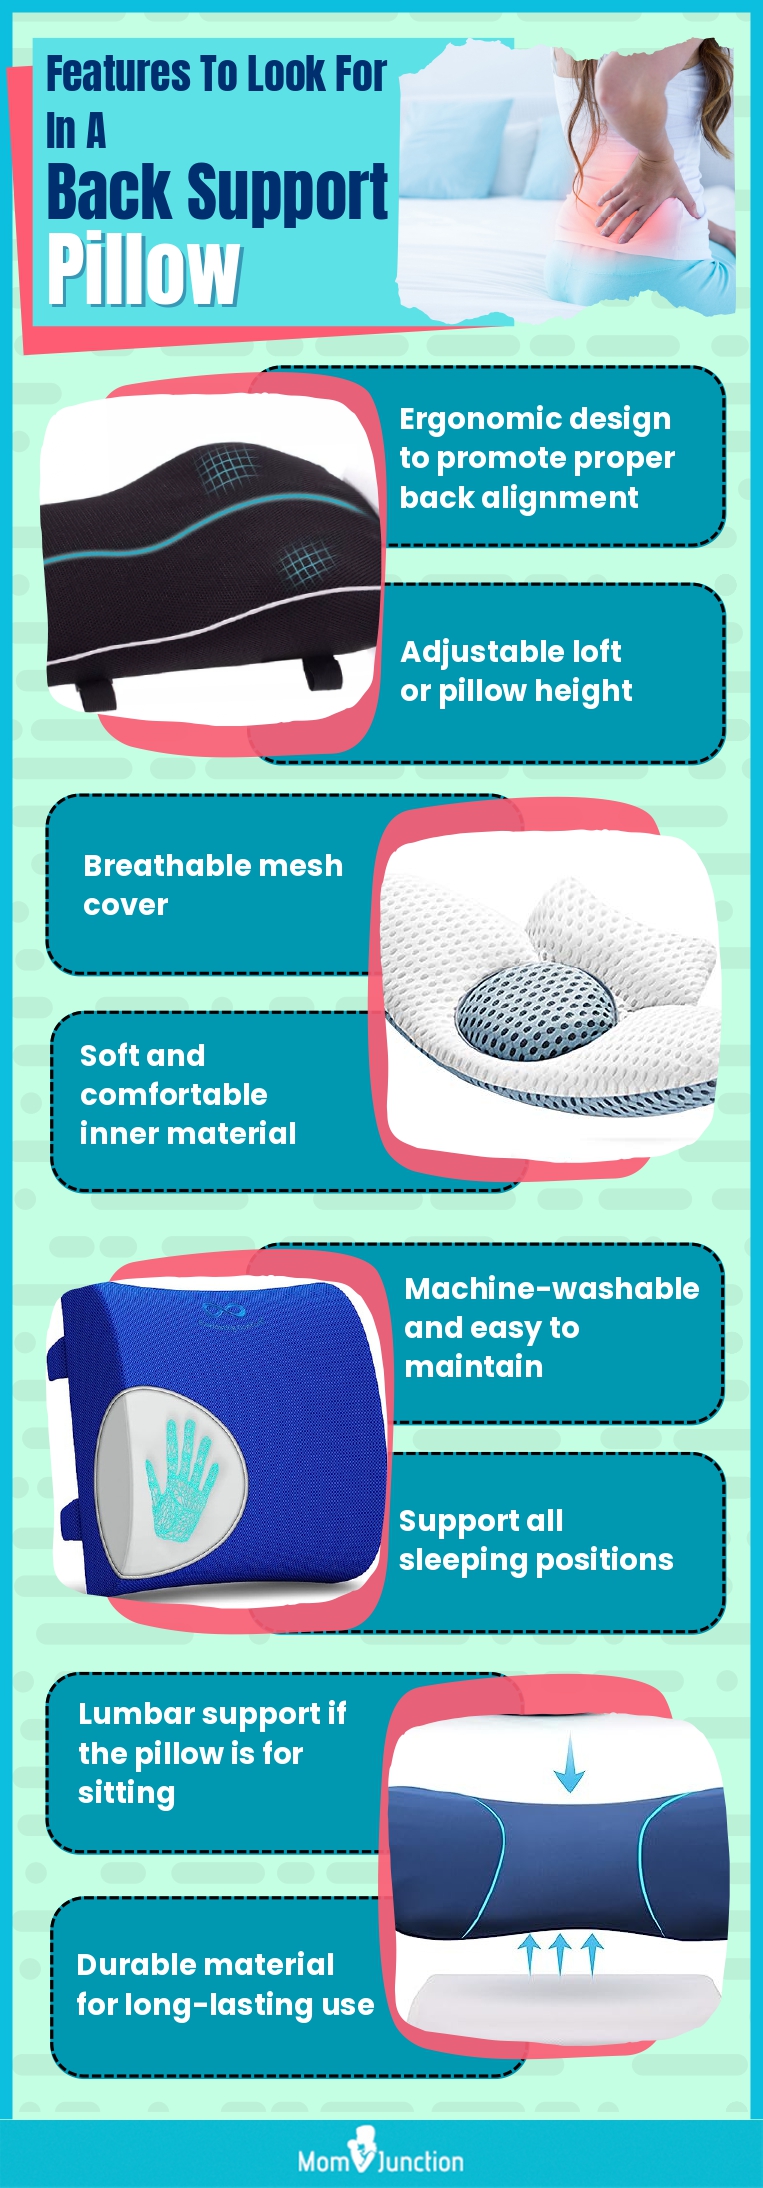 Features To Look For In A Back Support Pillow (infographic)